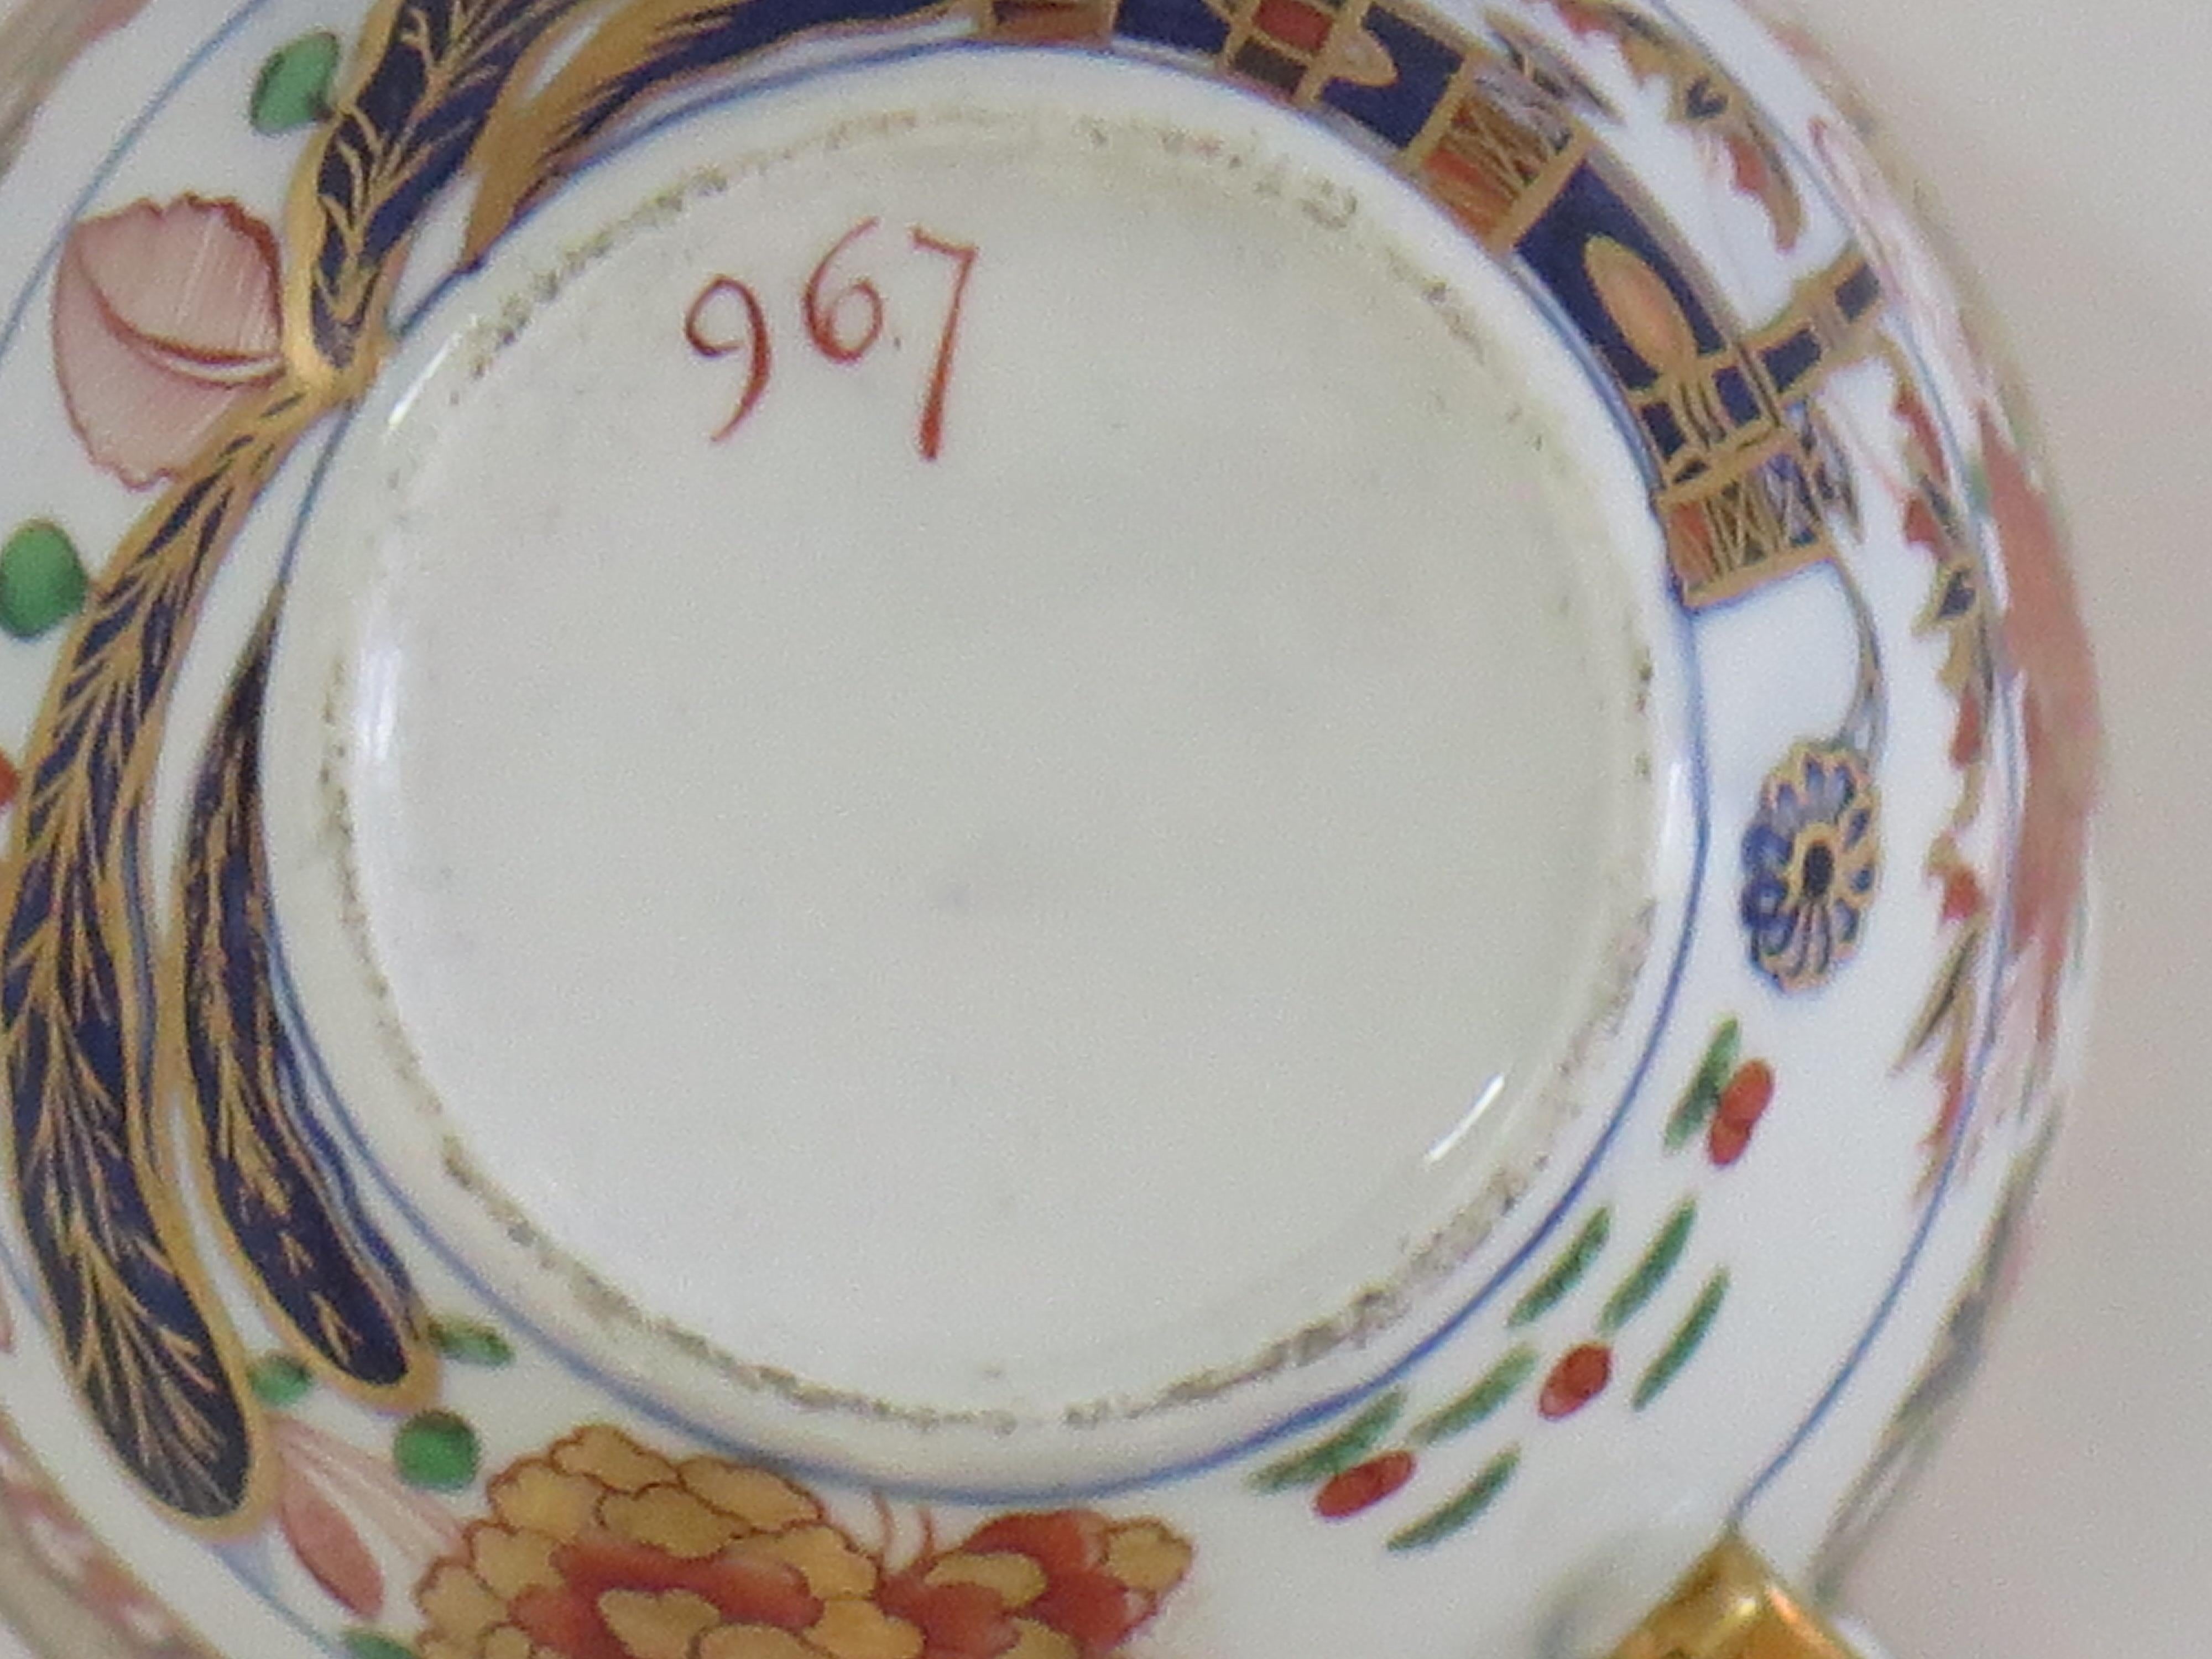 Spode Porcelain Tea Cup in Hand Painted & Gilded Pattern 967, circa 1810 For Sale 8